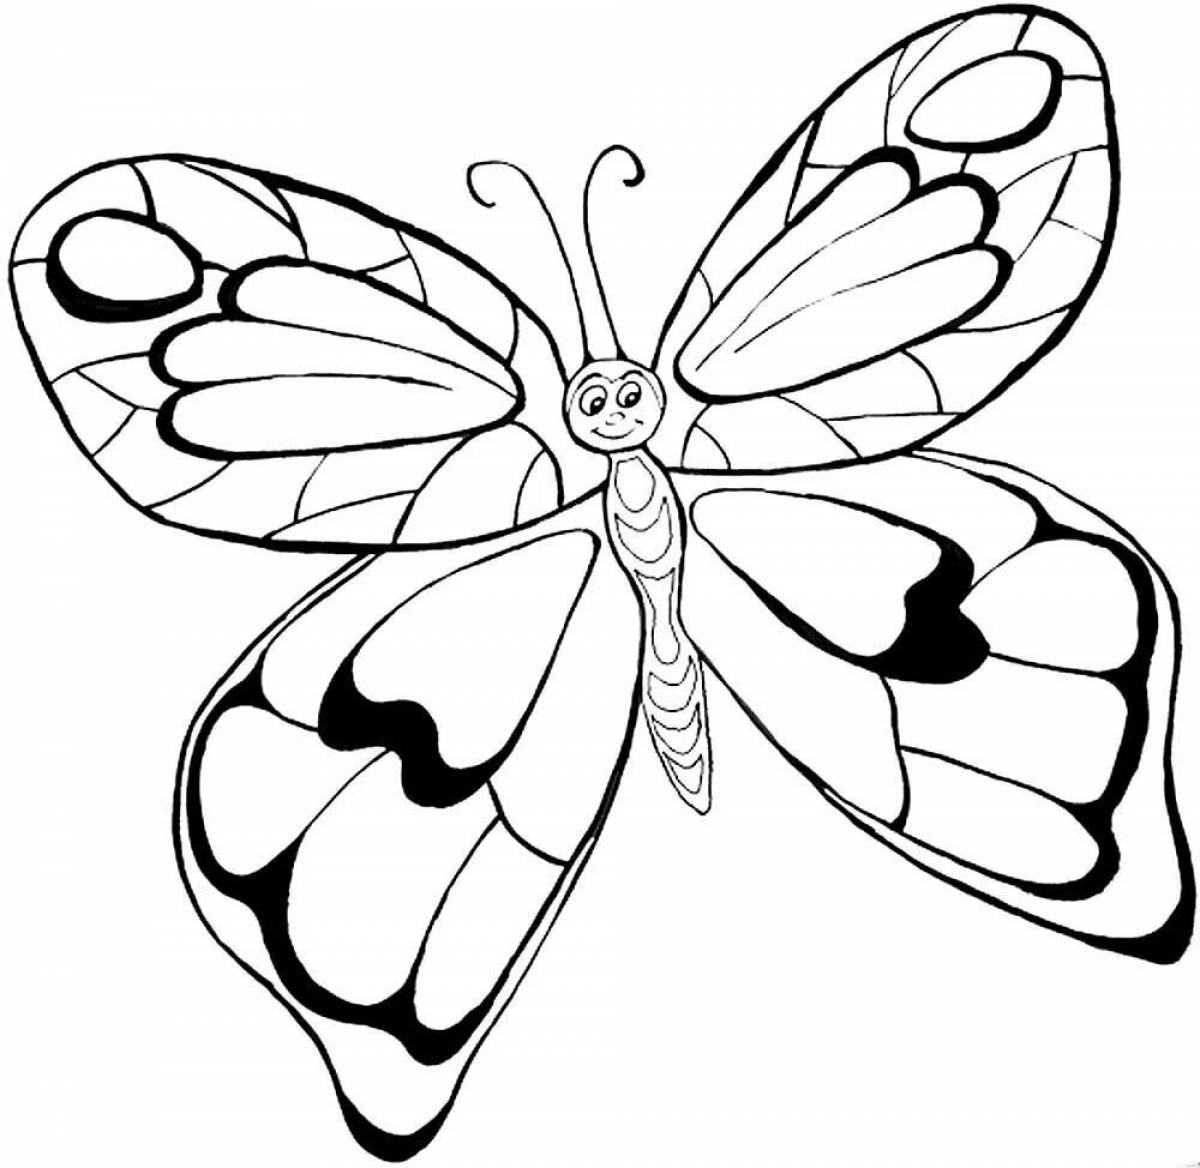 Magic butterfly coloring book for kids